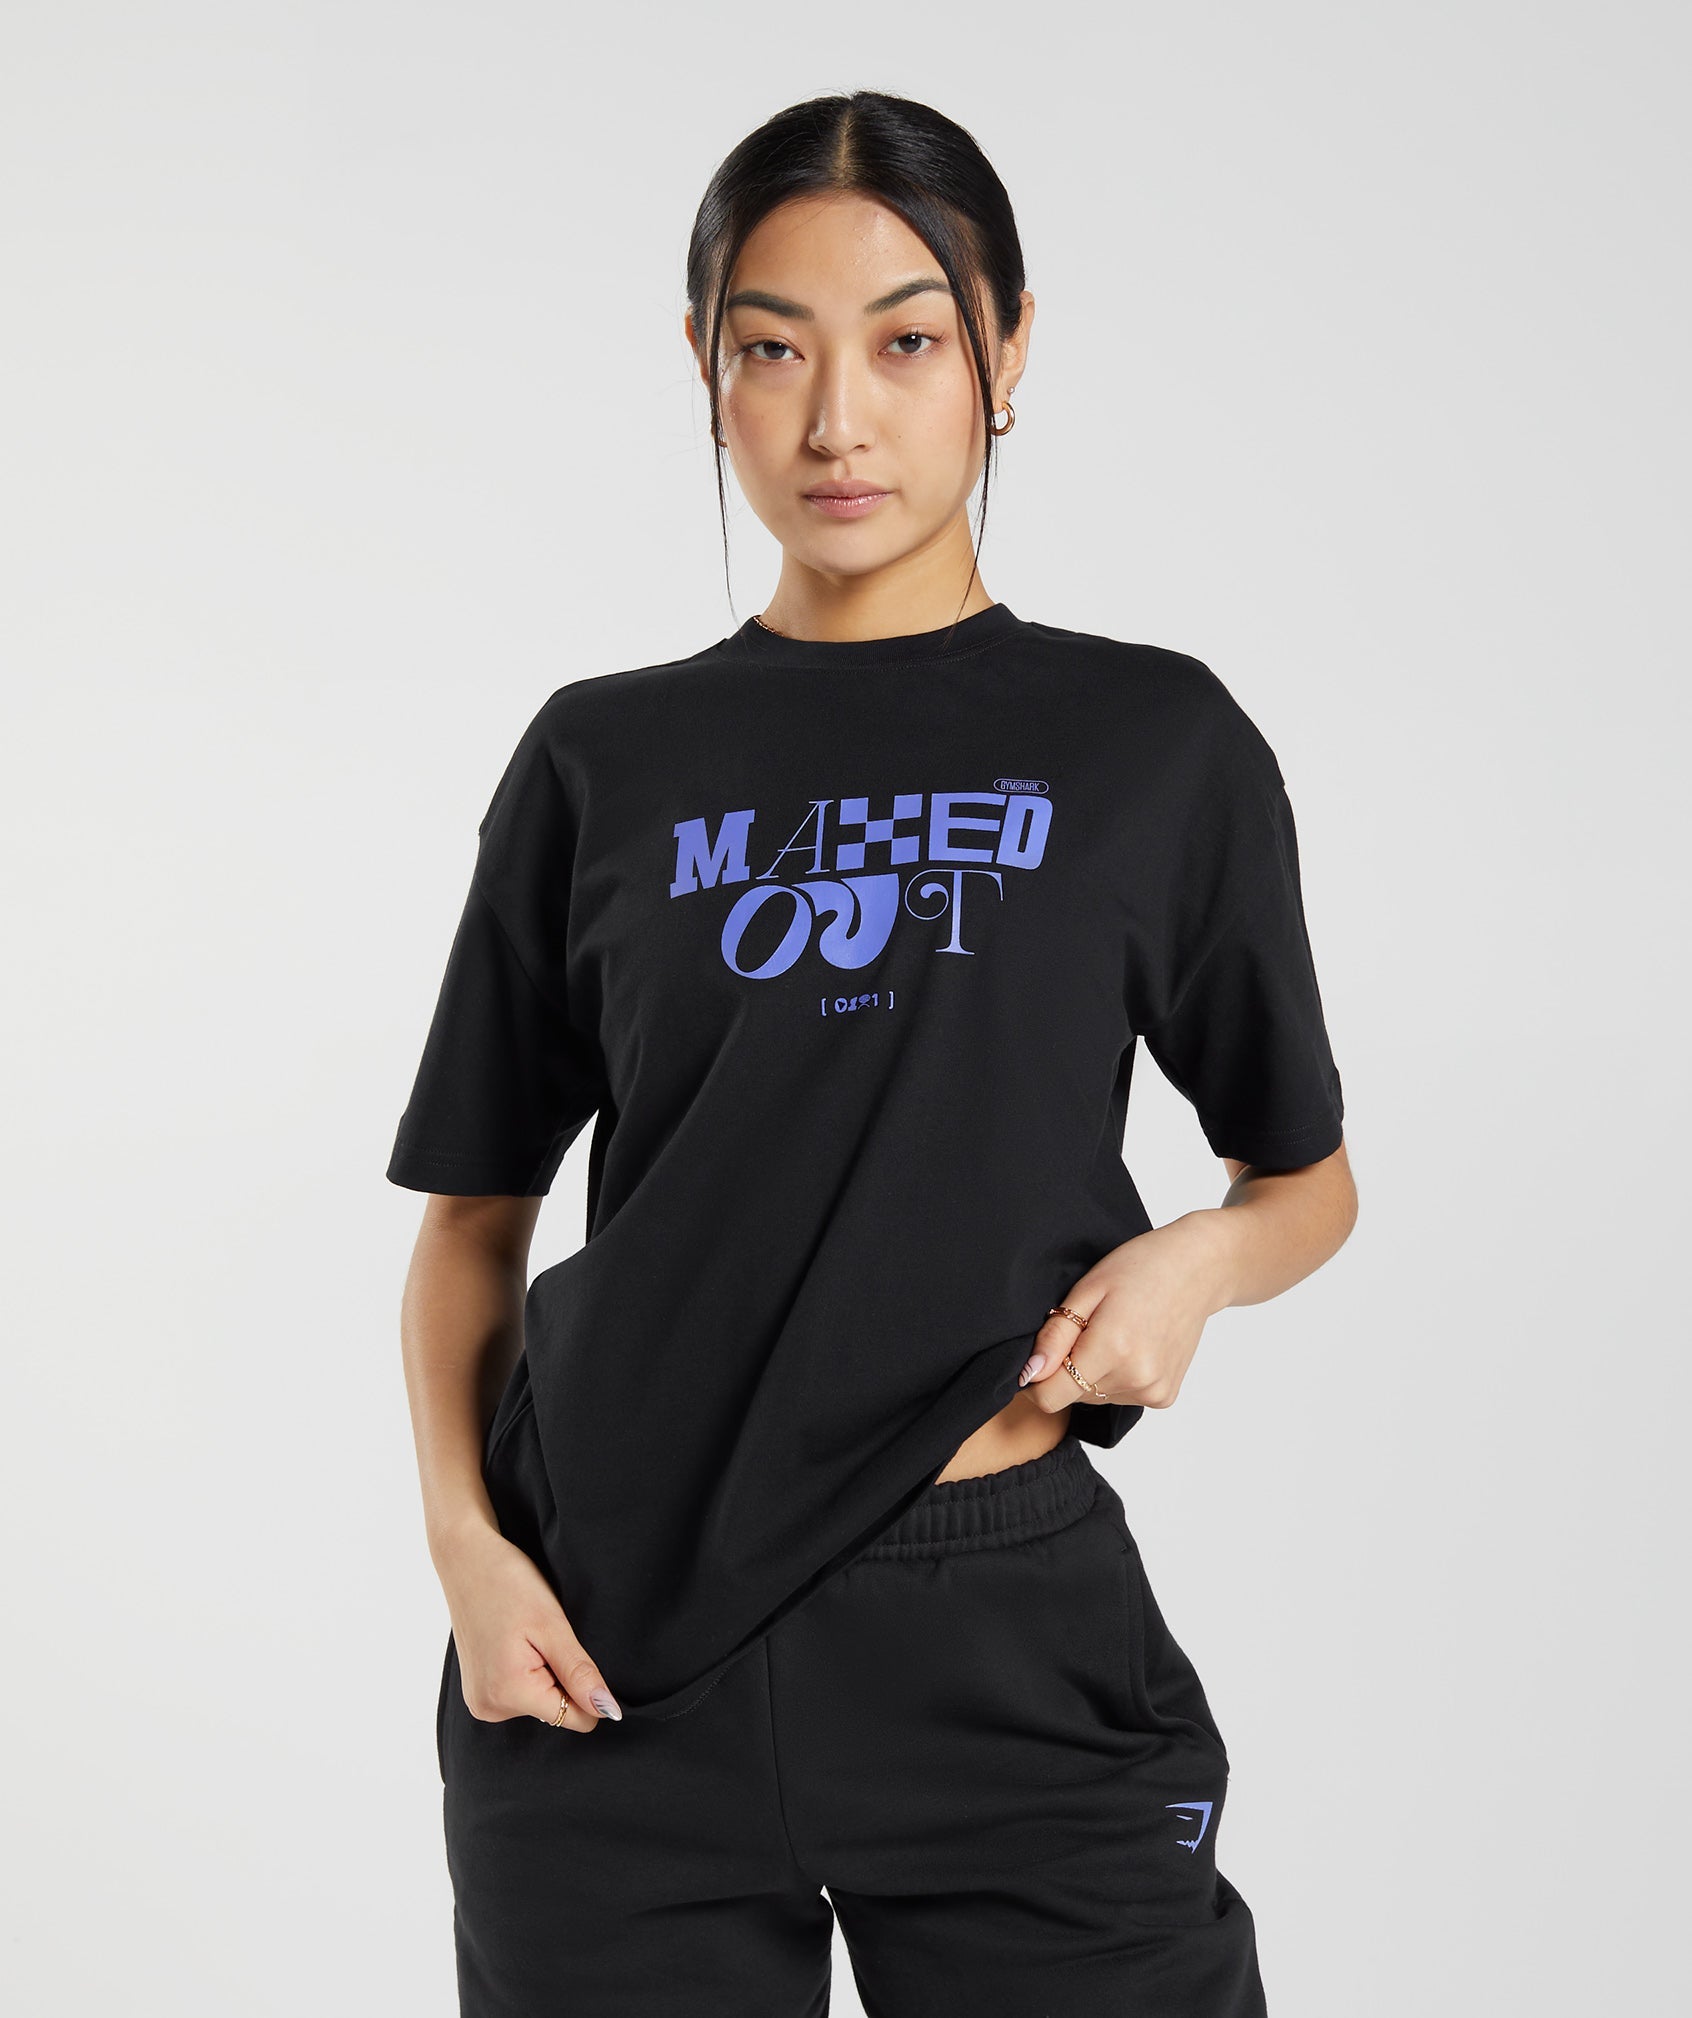 Maxed Out Oversized T-Shirt in Black - view 1